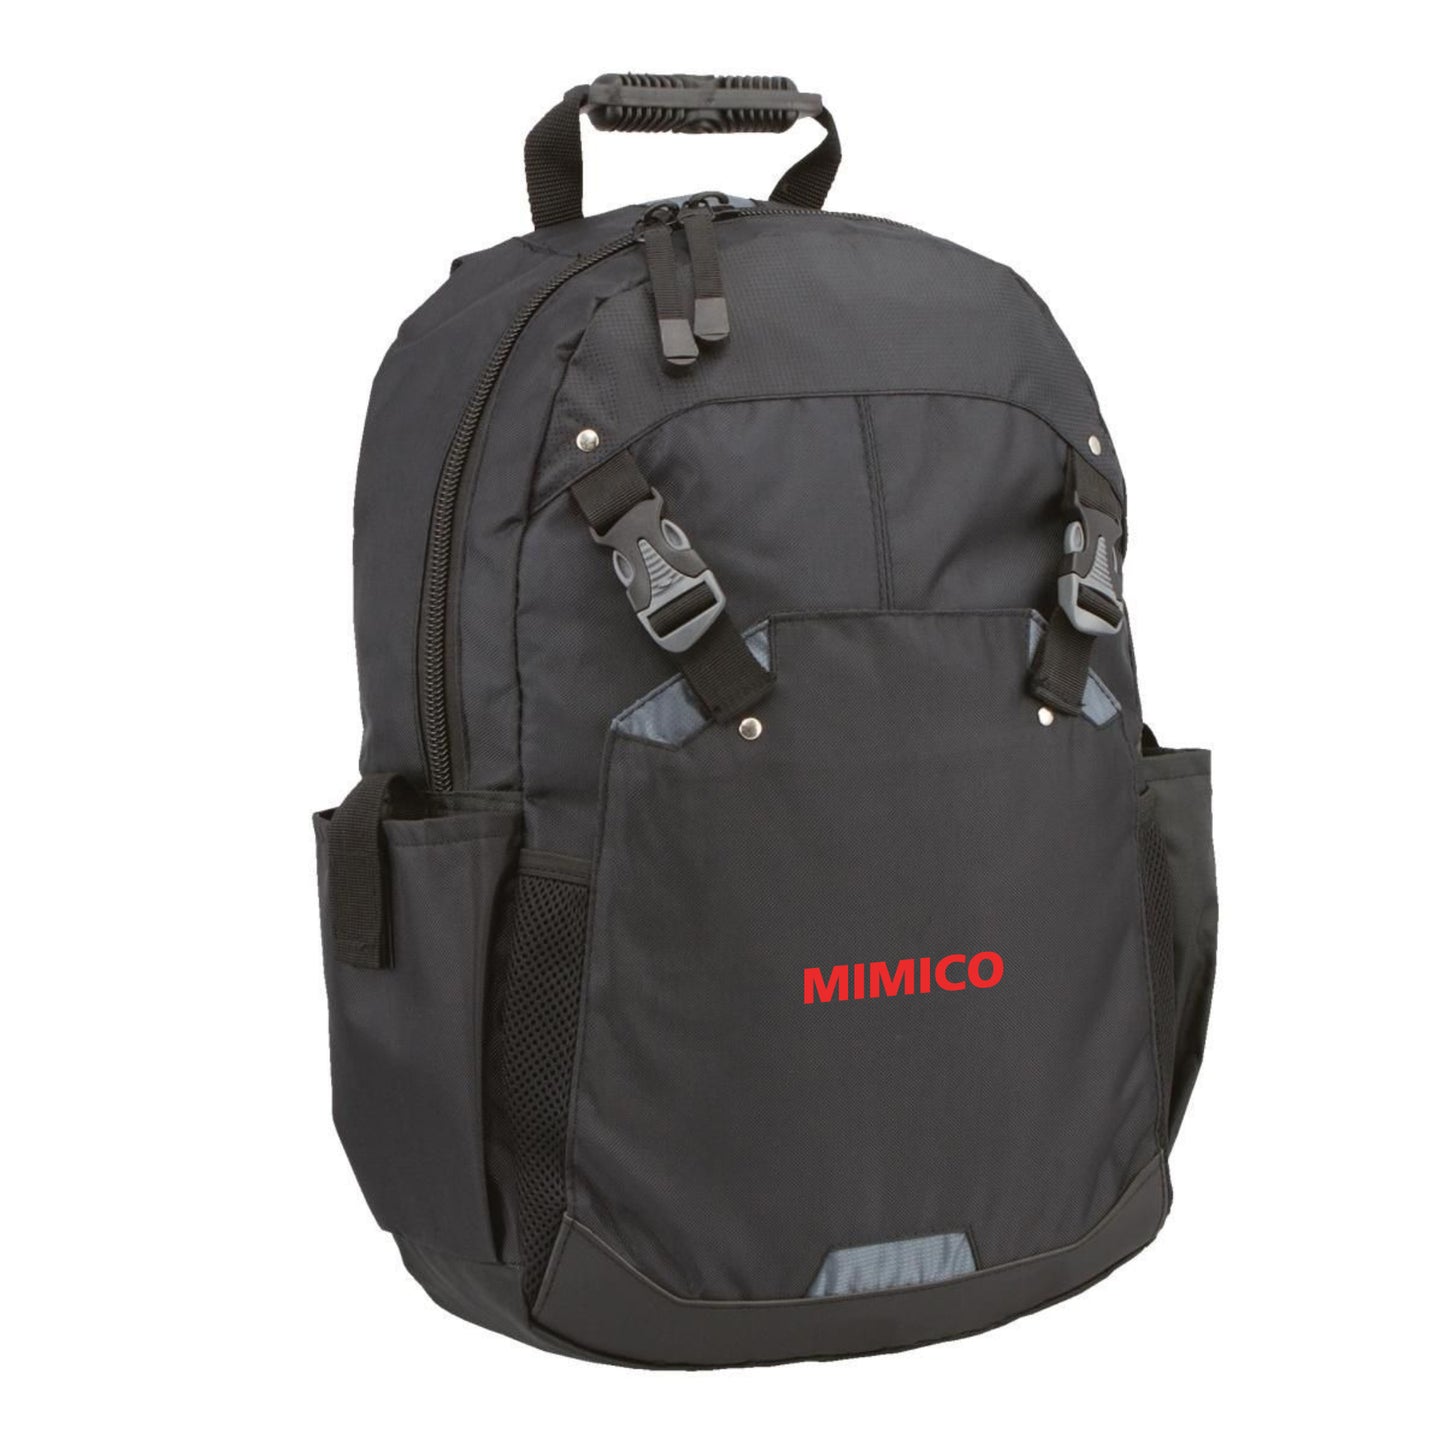 MIMICO LITHIUM LAPTOP BACKPACK